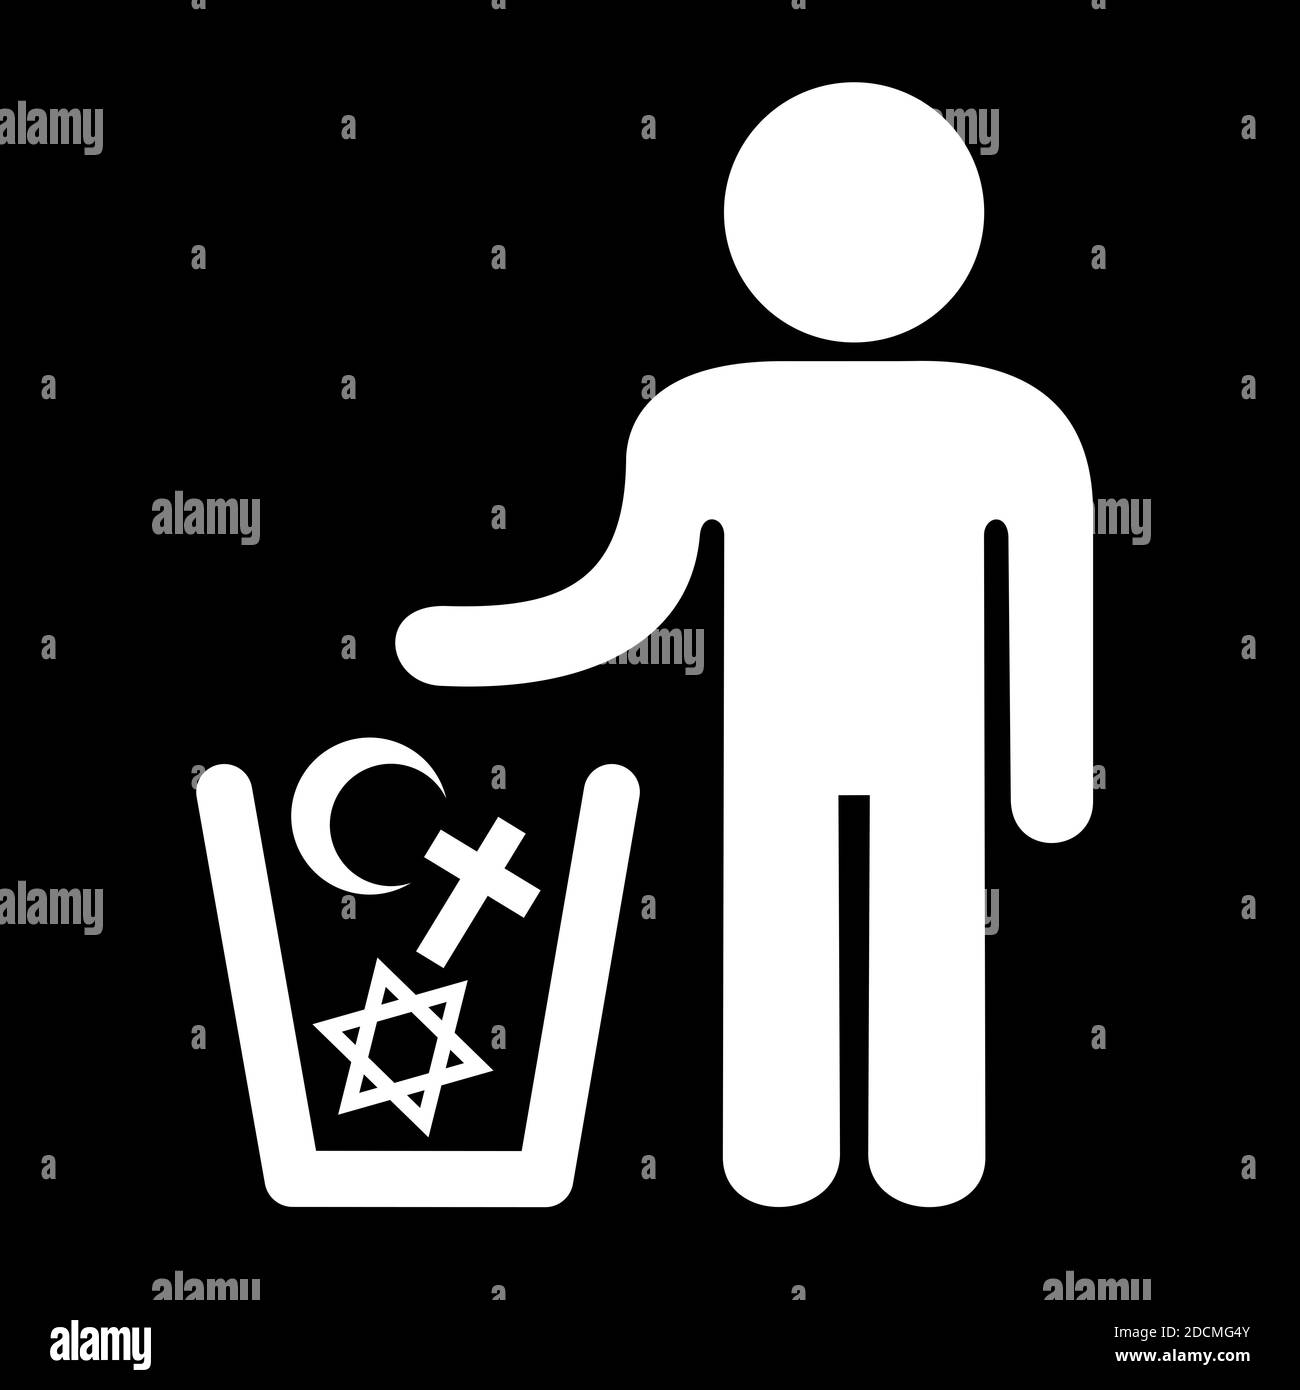 Atheism and denial of religious belief - vector illustration of man and waste container with symbols of religions as metaphor of decision to abandon r Stock Photo